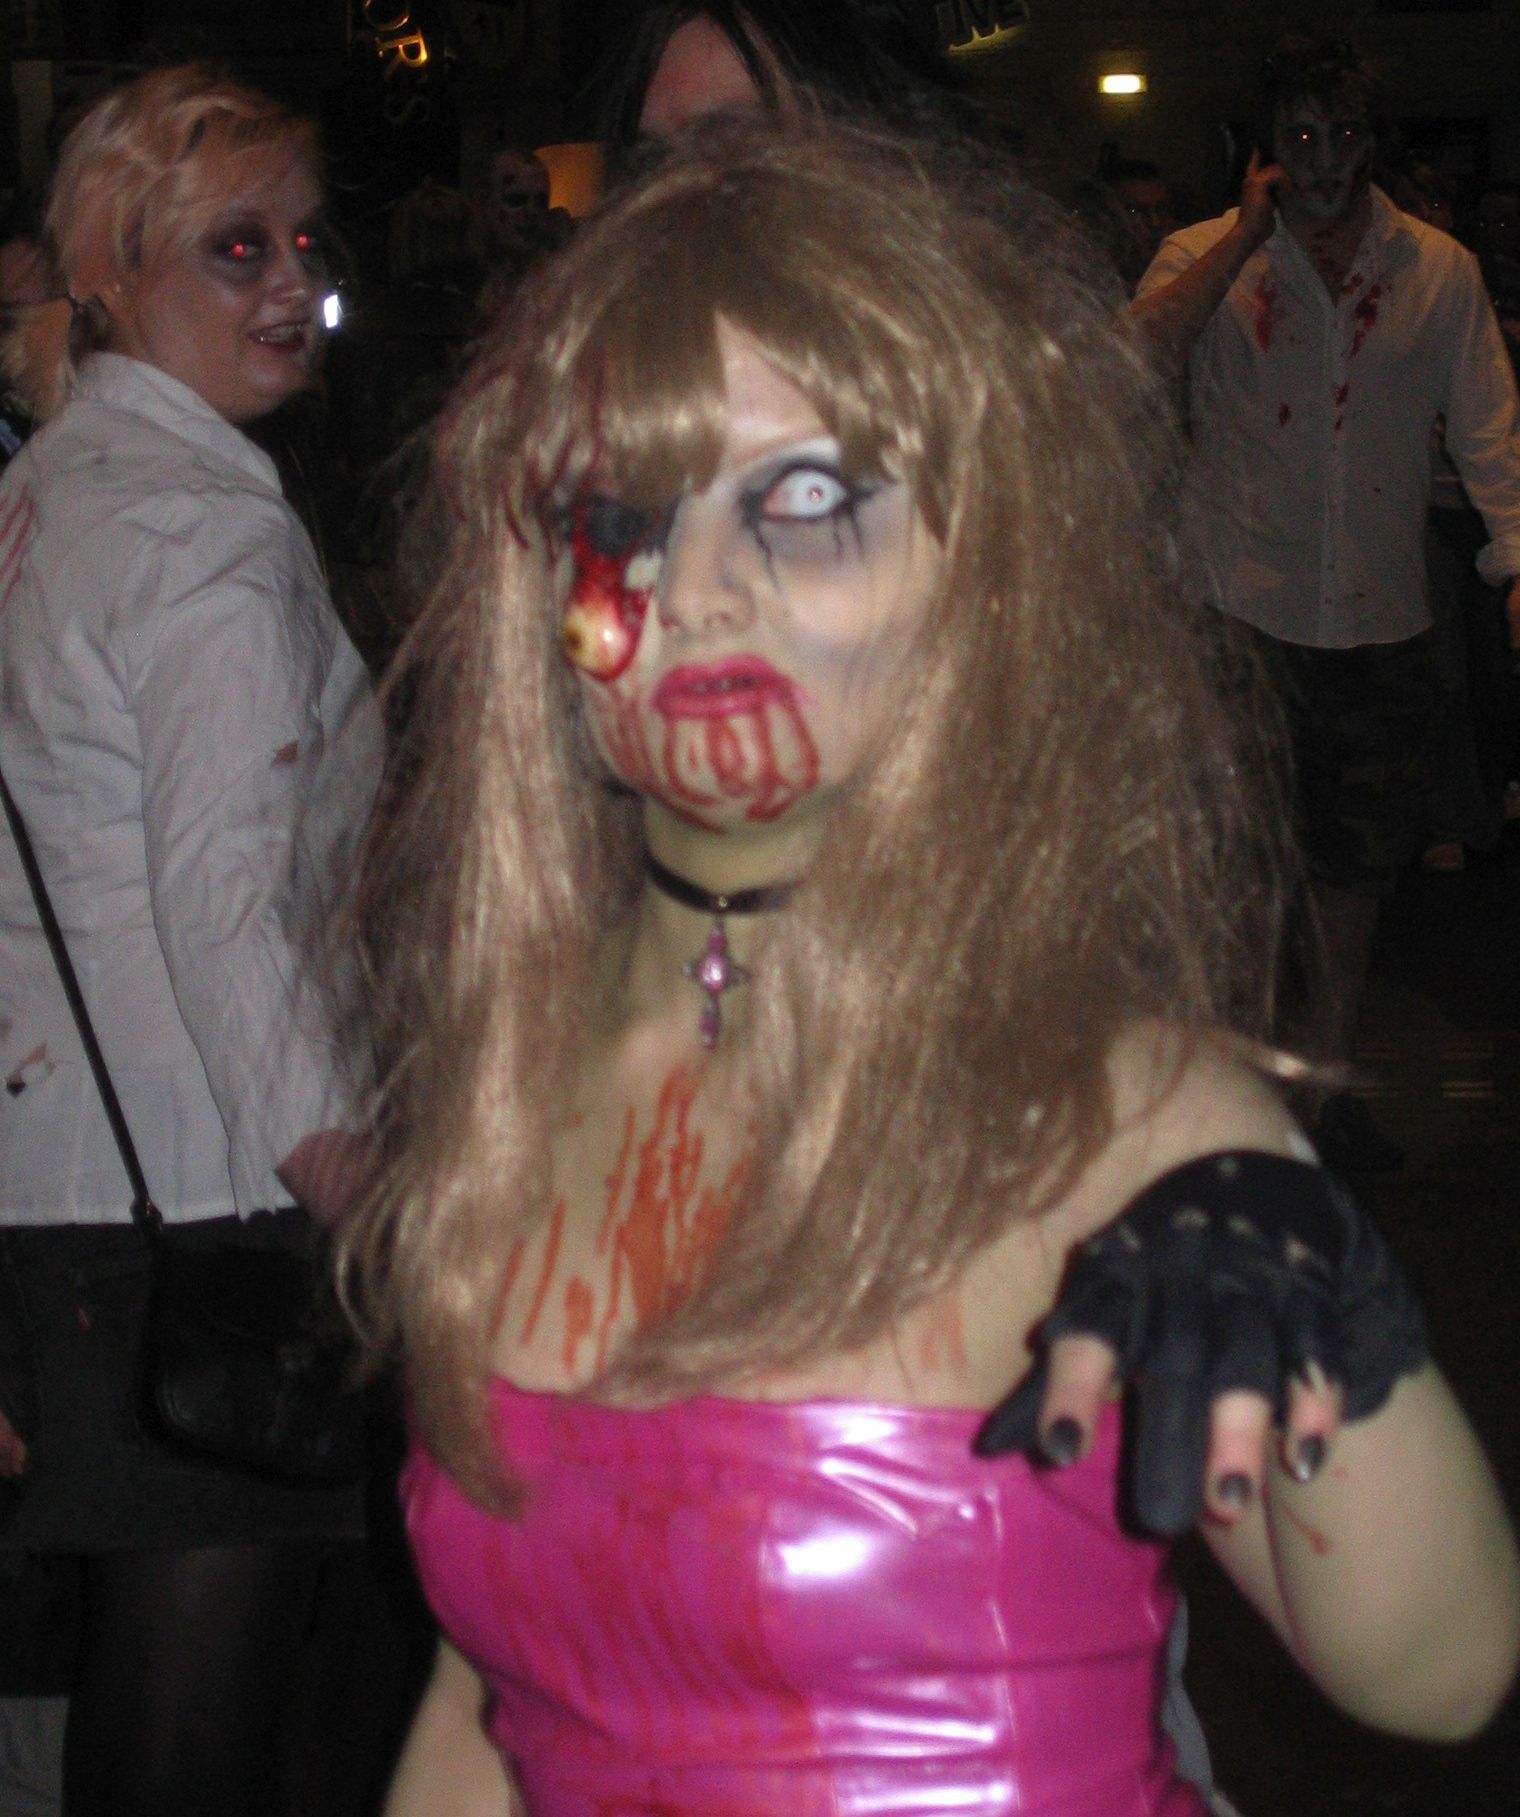  Photo taken by me – Morganna Bramah as a zombie girl in Manchester 